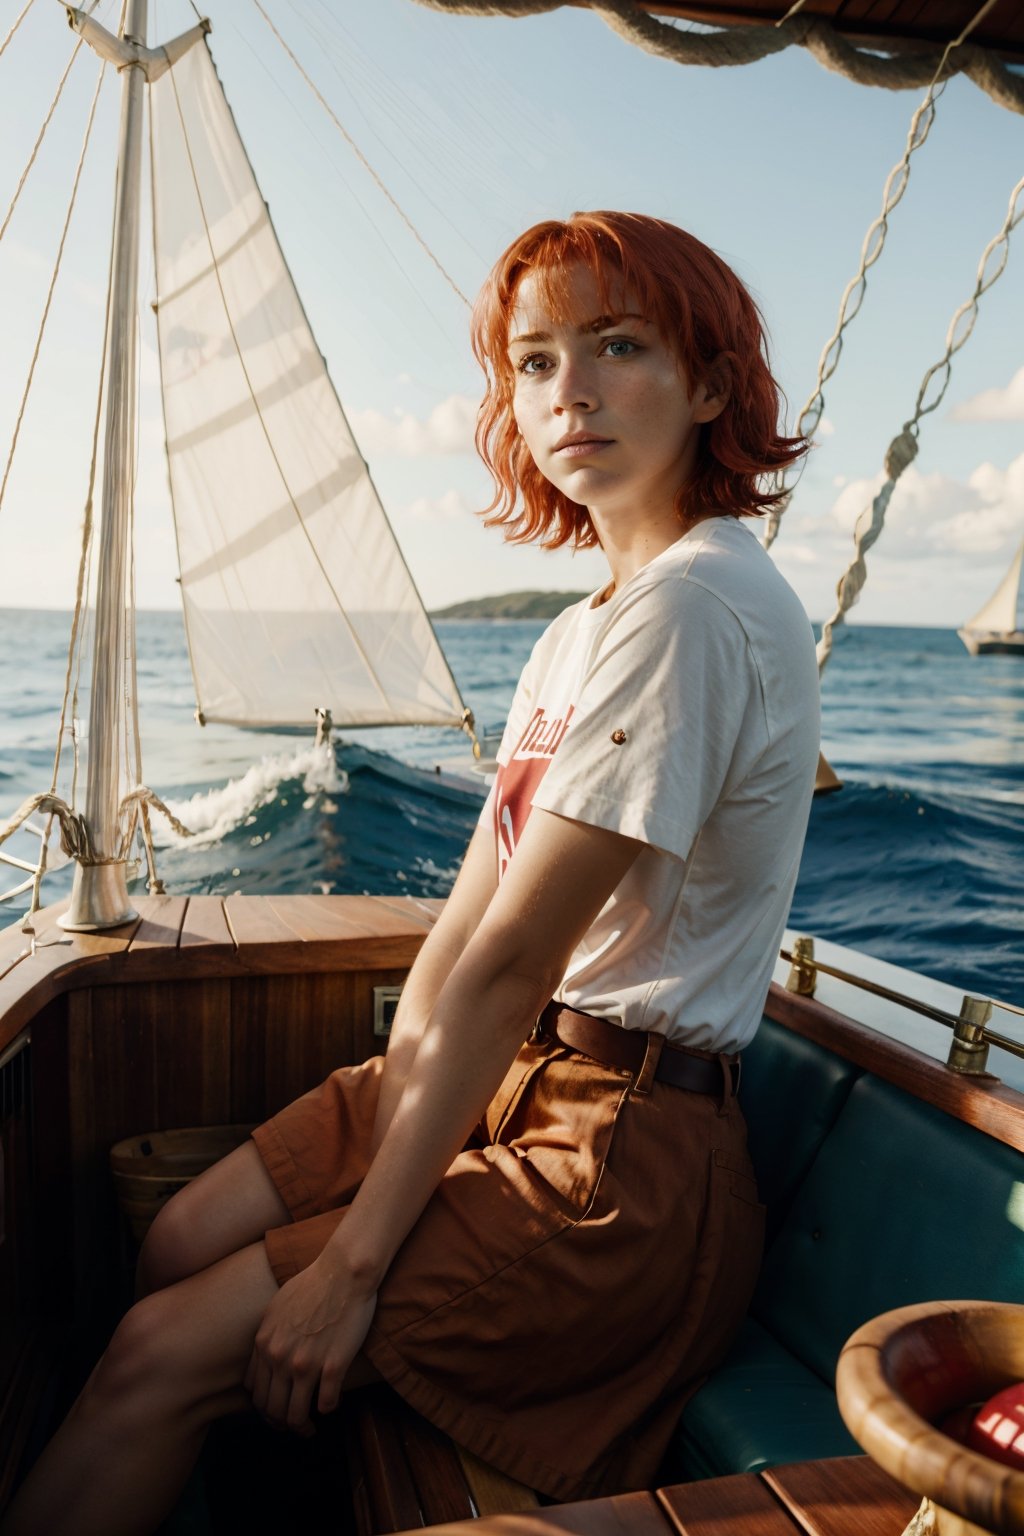 emilyrudd, nami, a woman with red hair on a wooden boat 
, a woman with red hair